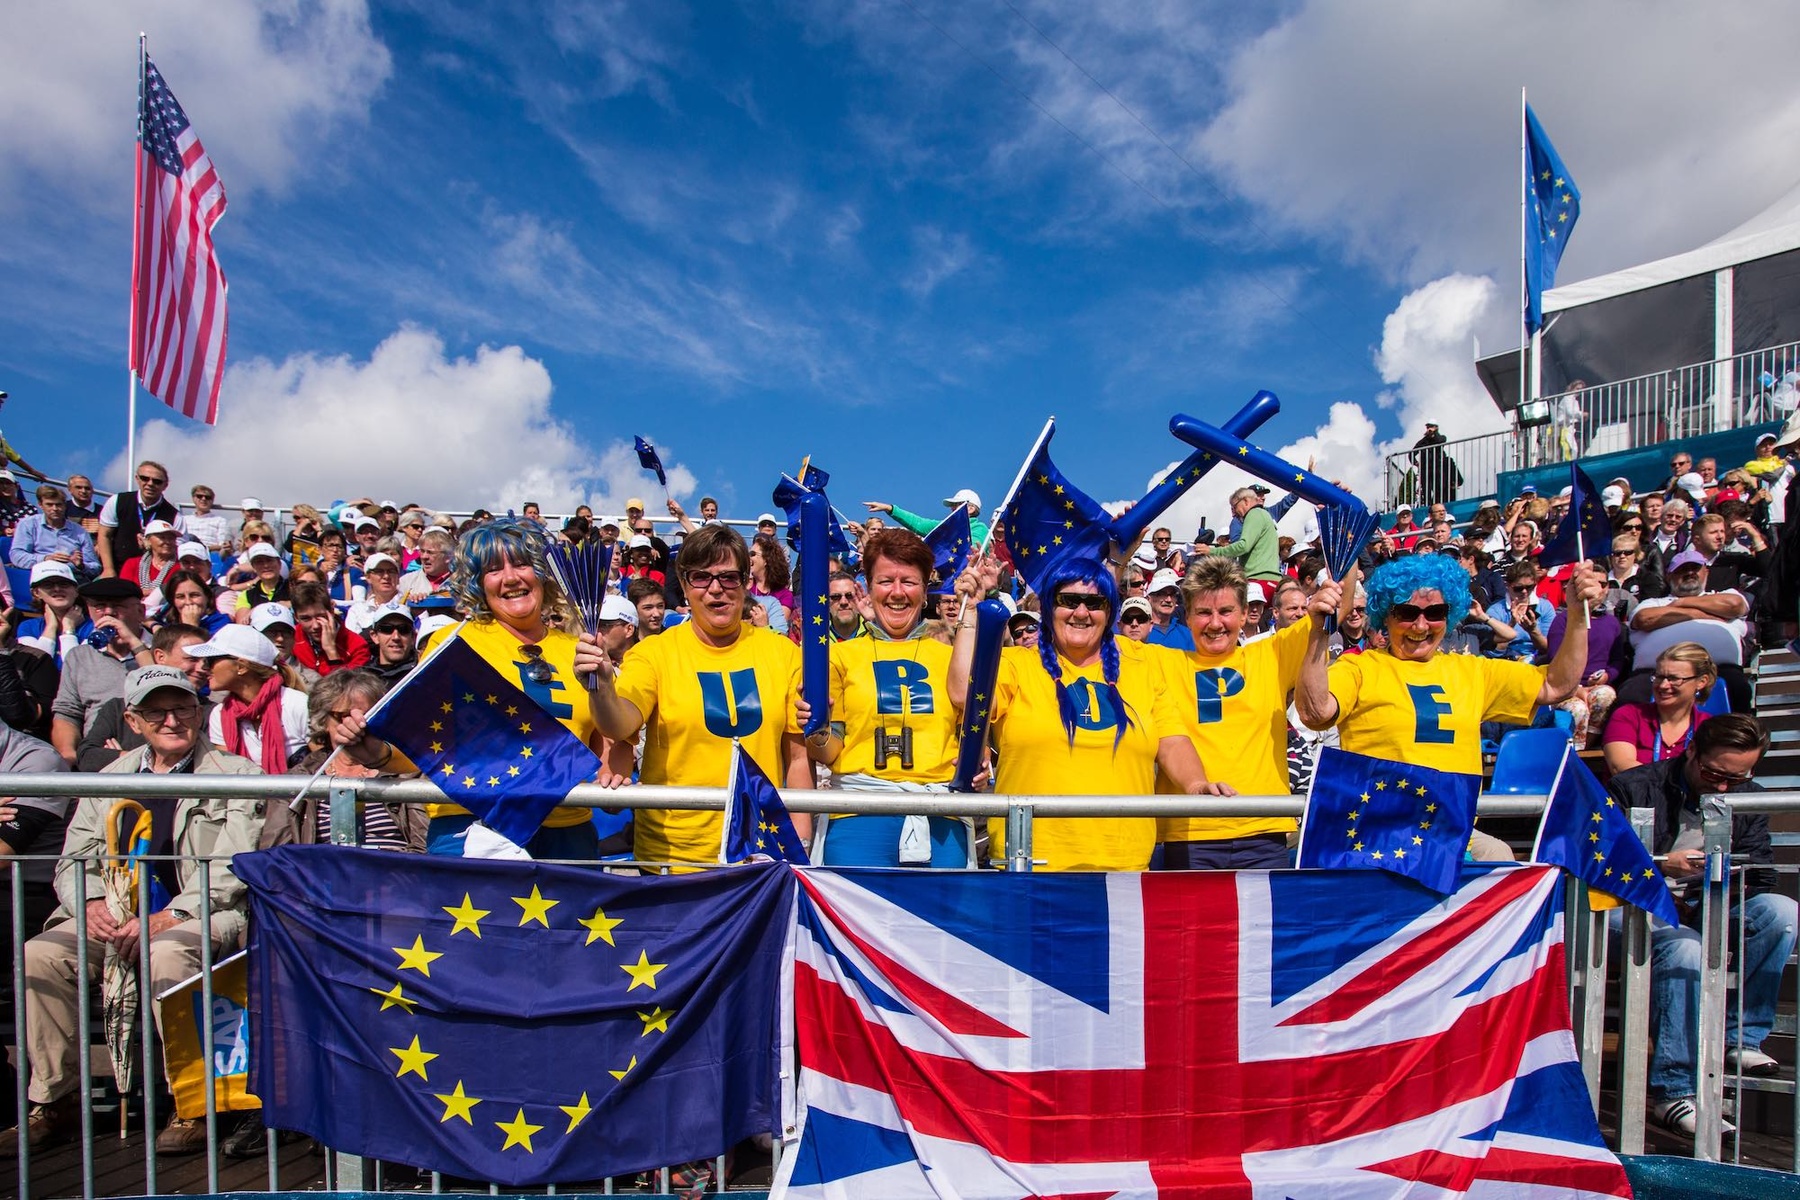 European fans on the15th hole